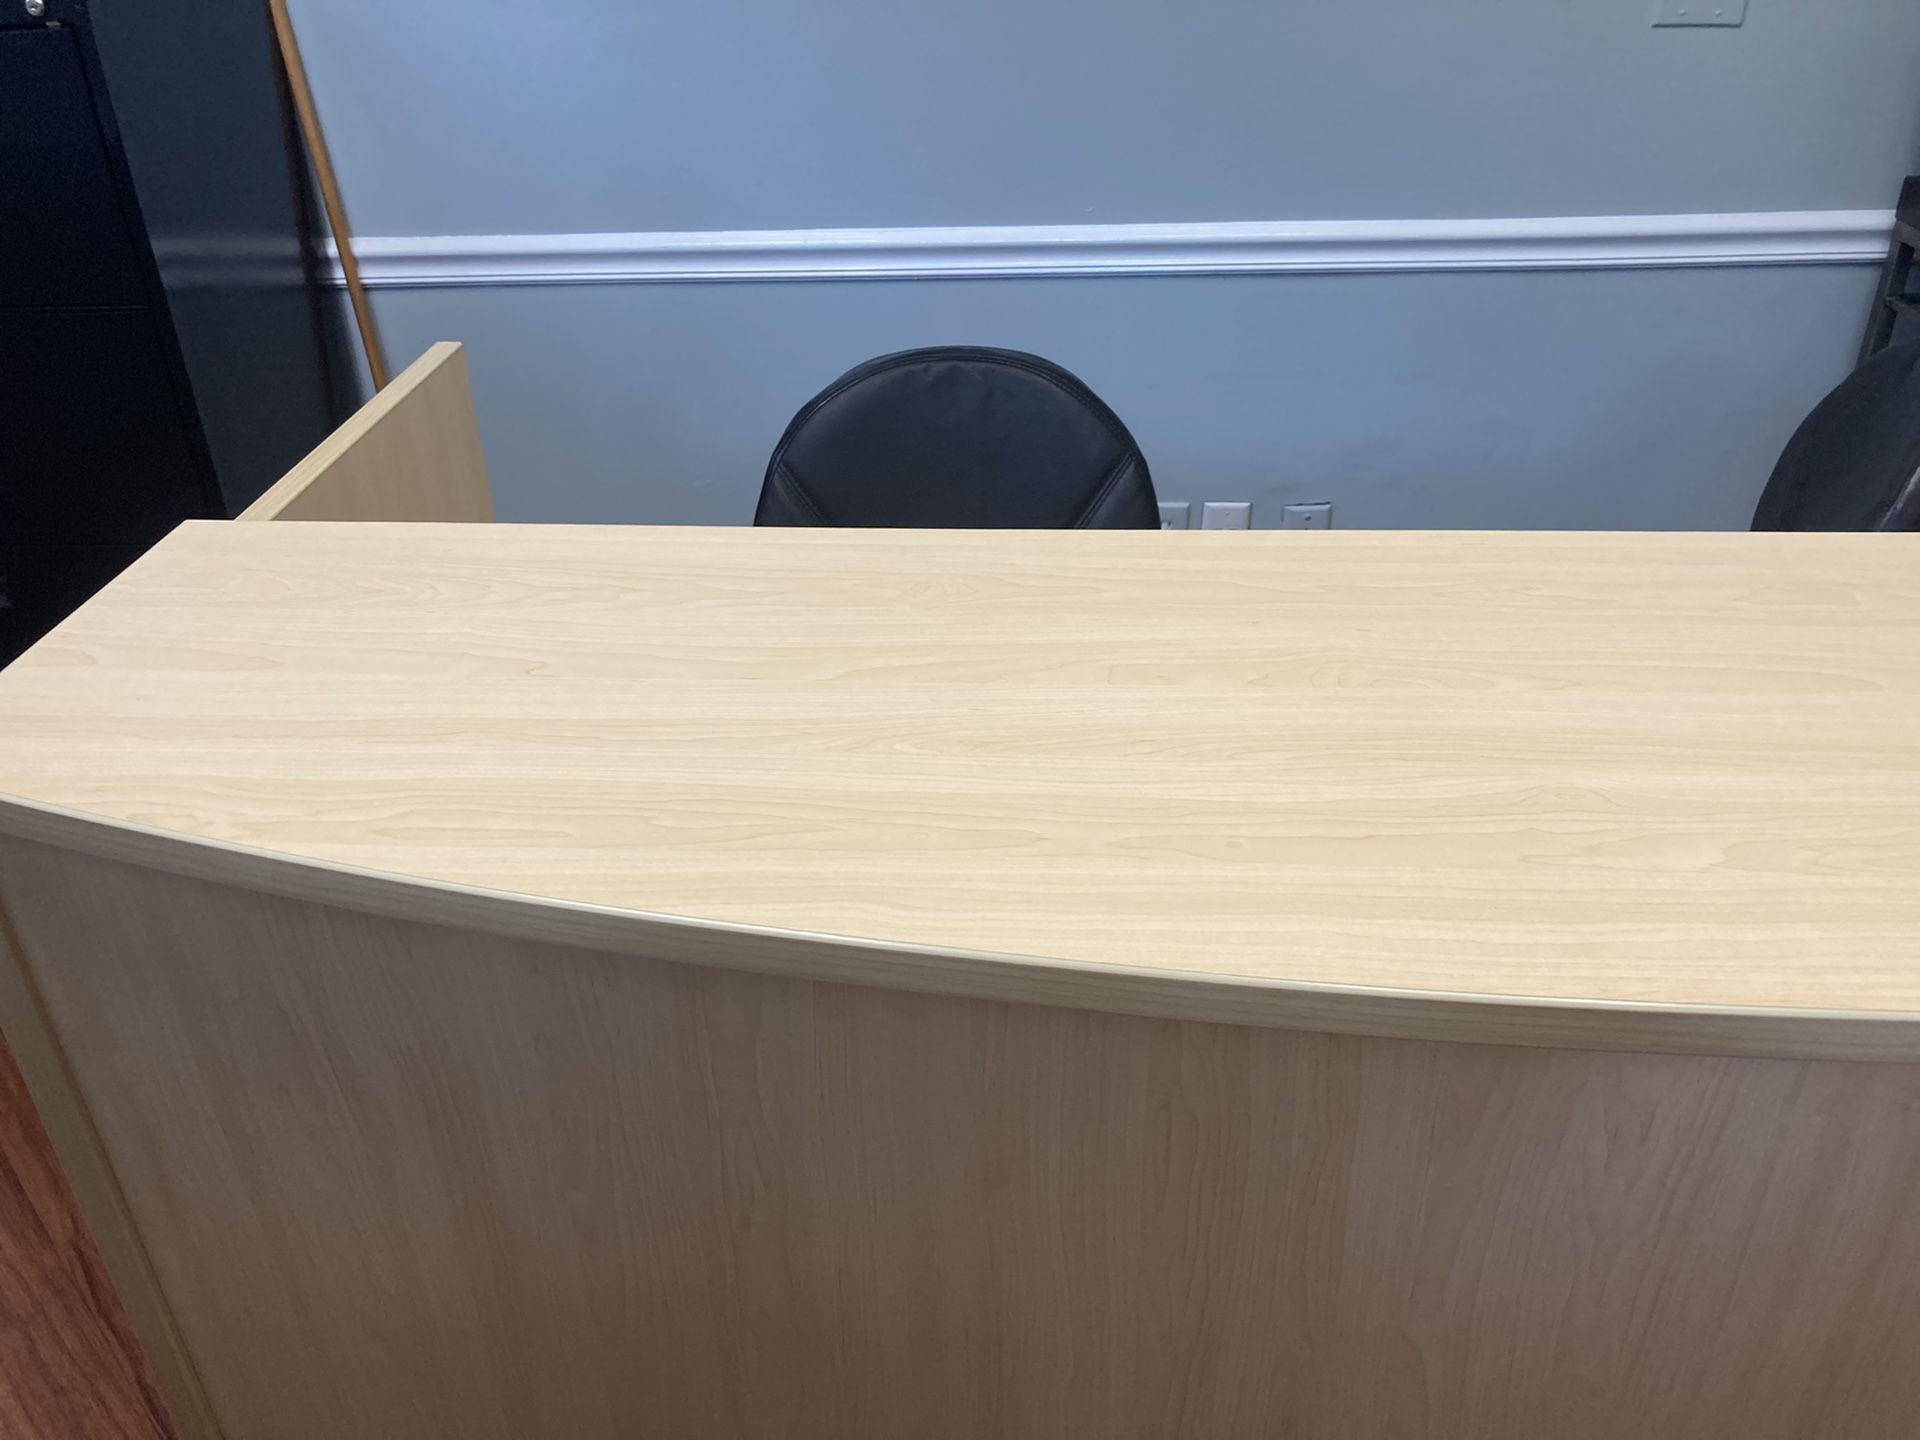 Big reception desk 30in deep 40 inch high and 71” long with curved front.